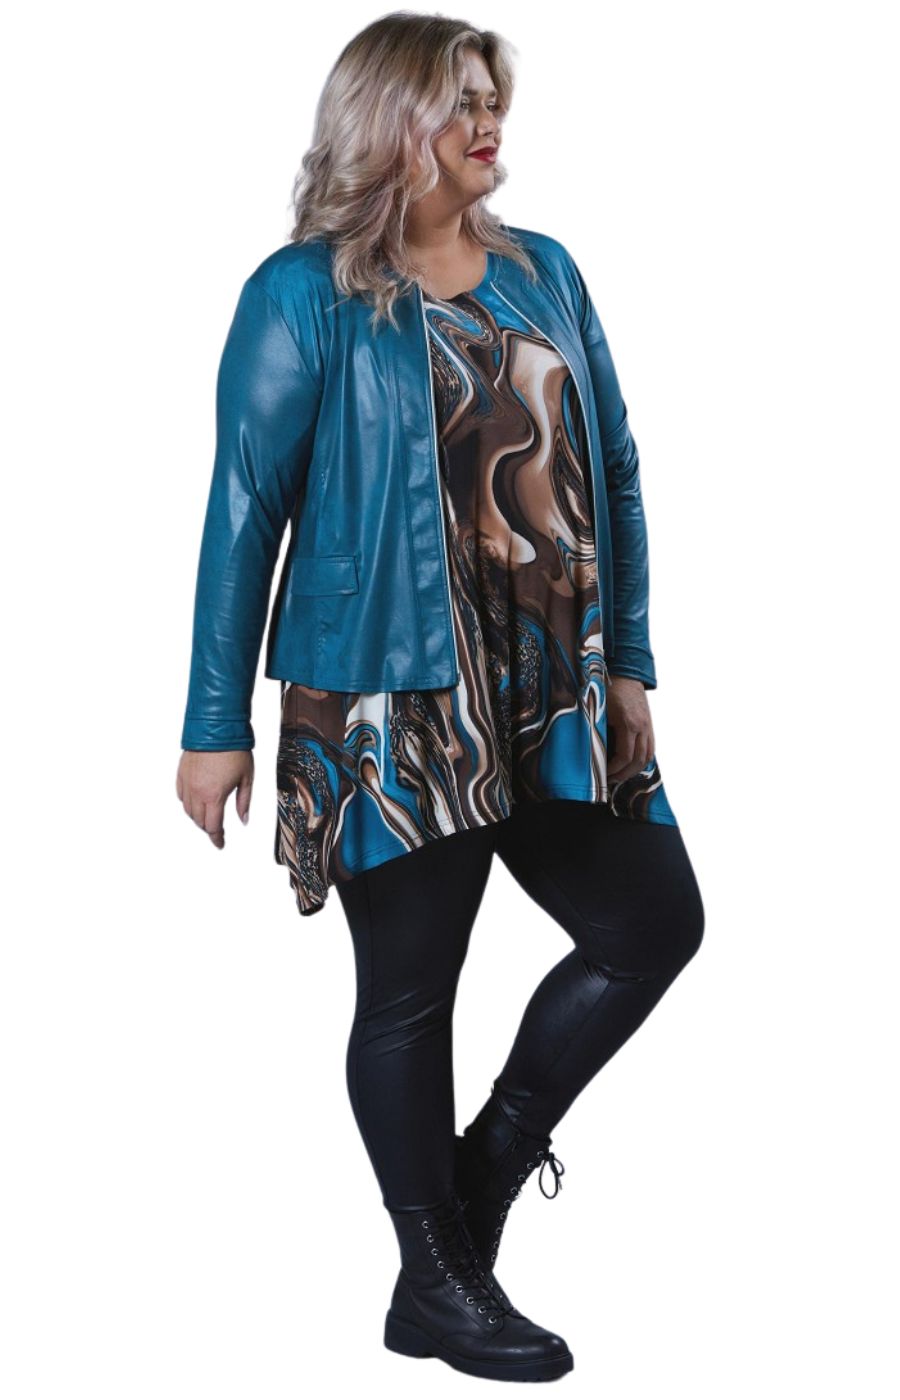 Magna Leather Look Jacket in Teal